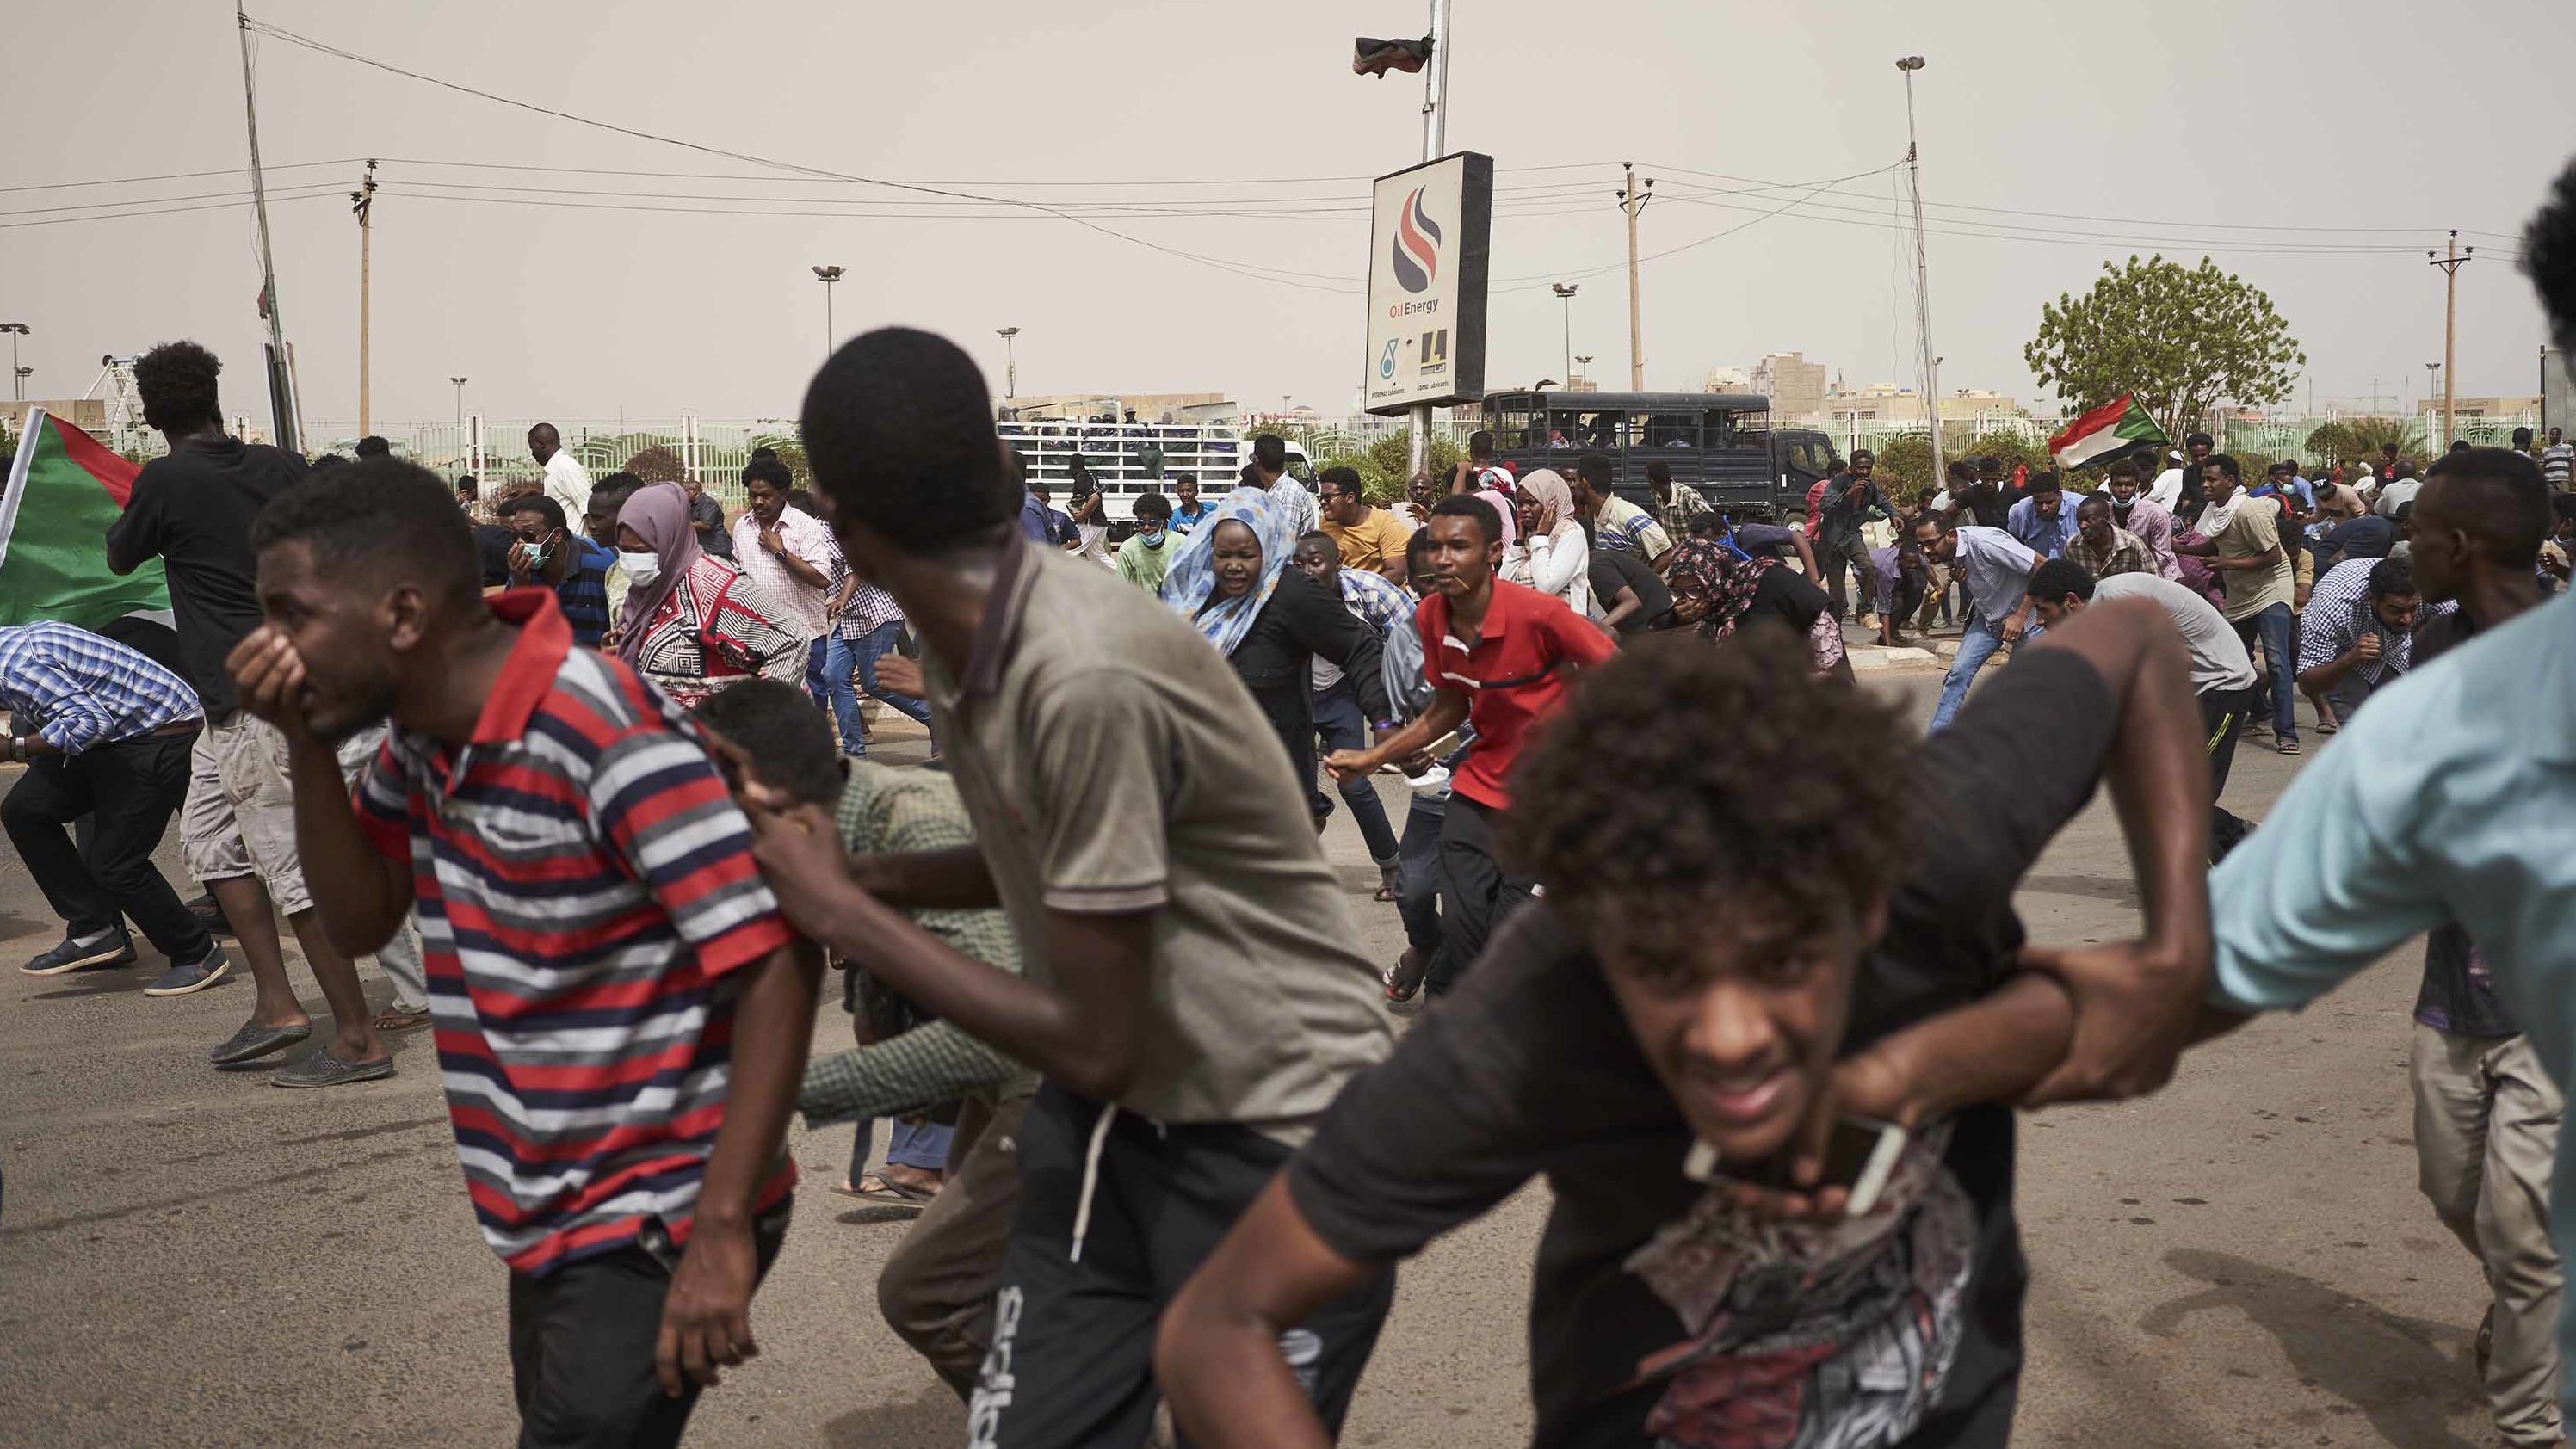 Protesters run from a police van that drove through a crowd on June 30 in Khartoum. The protesters faced off with armed forces on a main road leading to the airport.